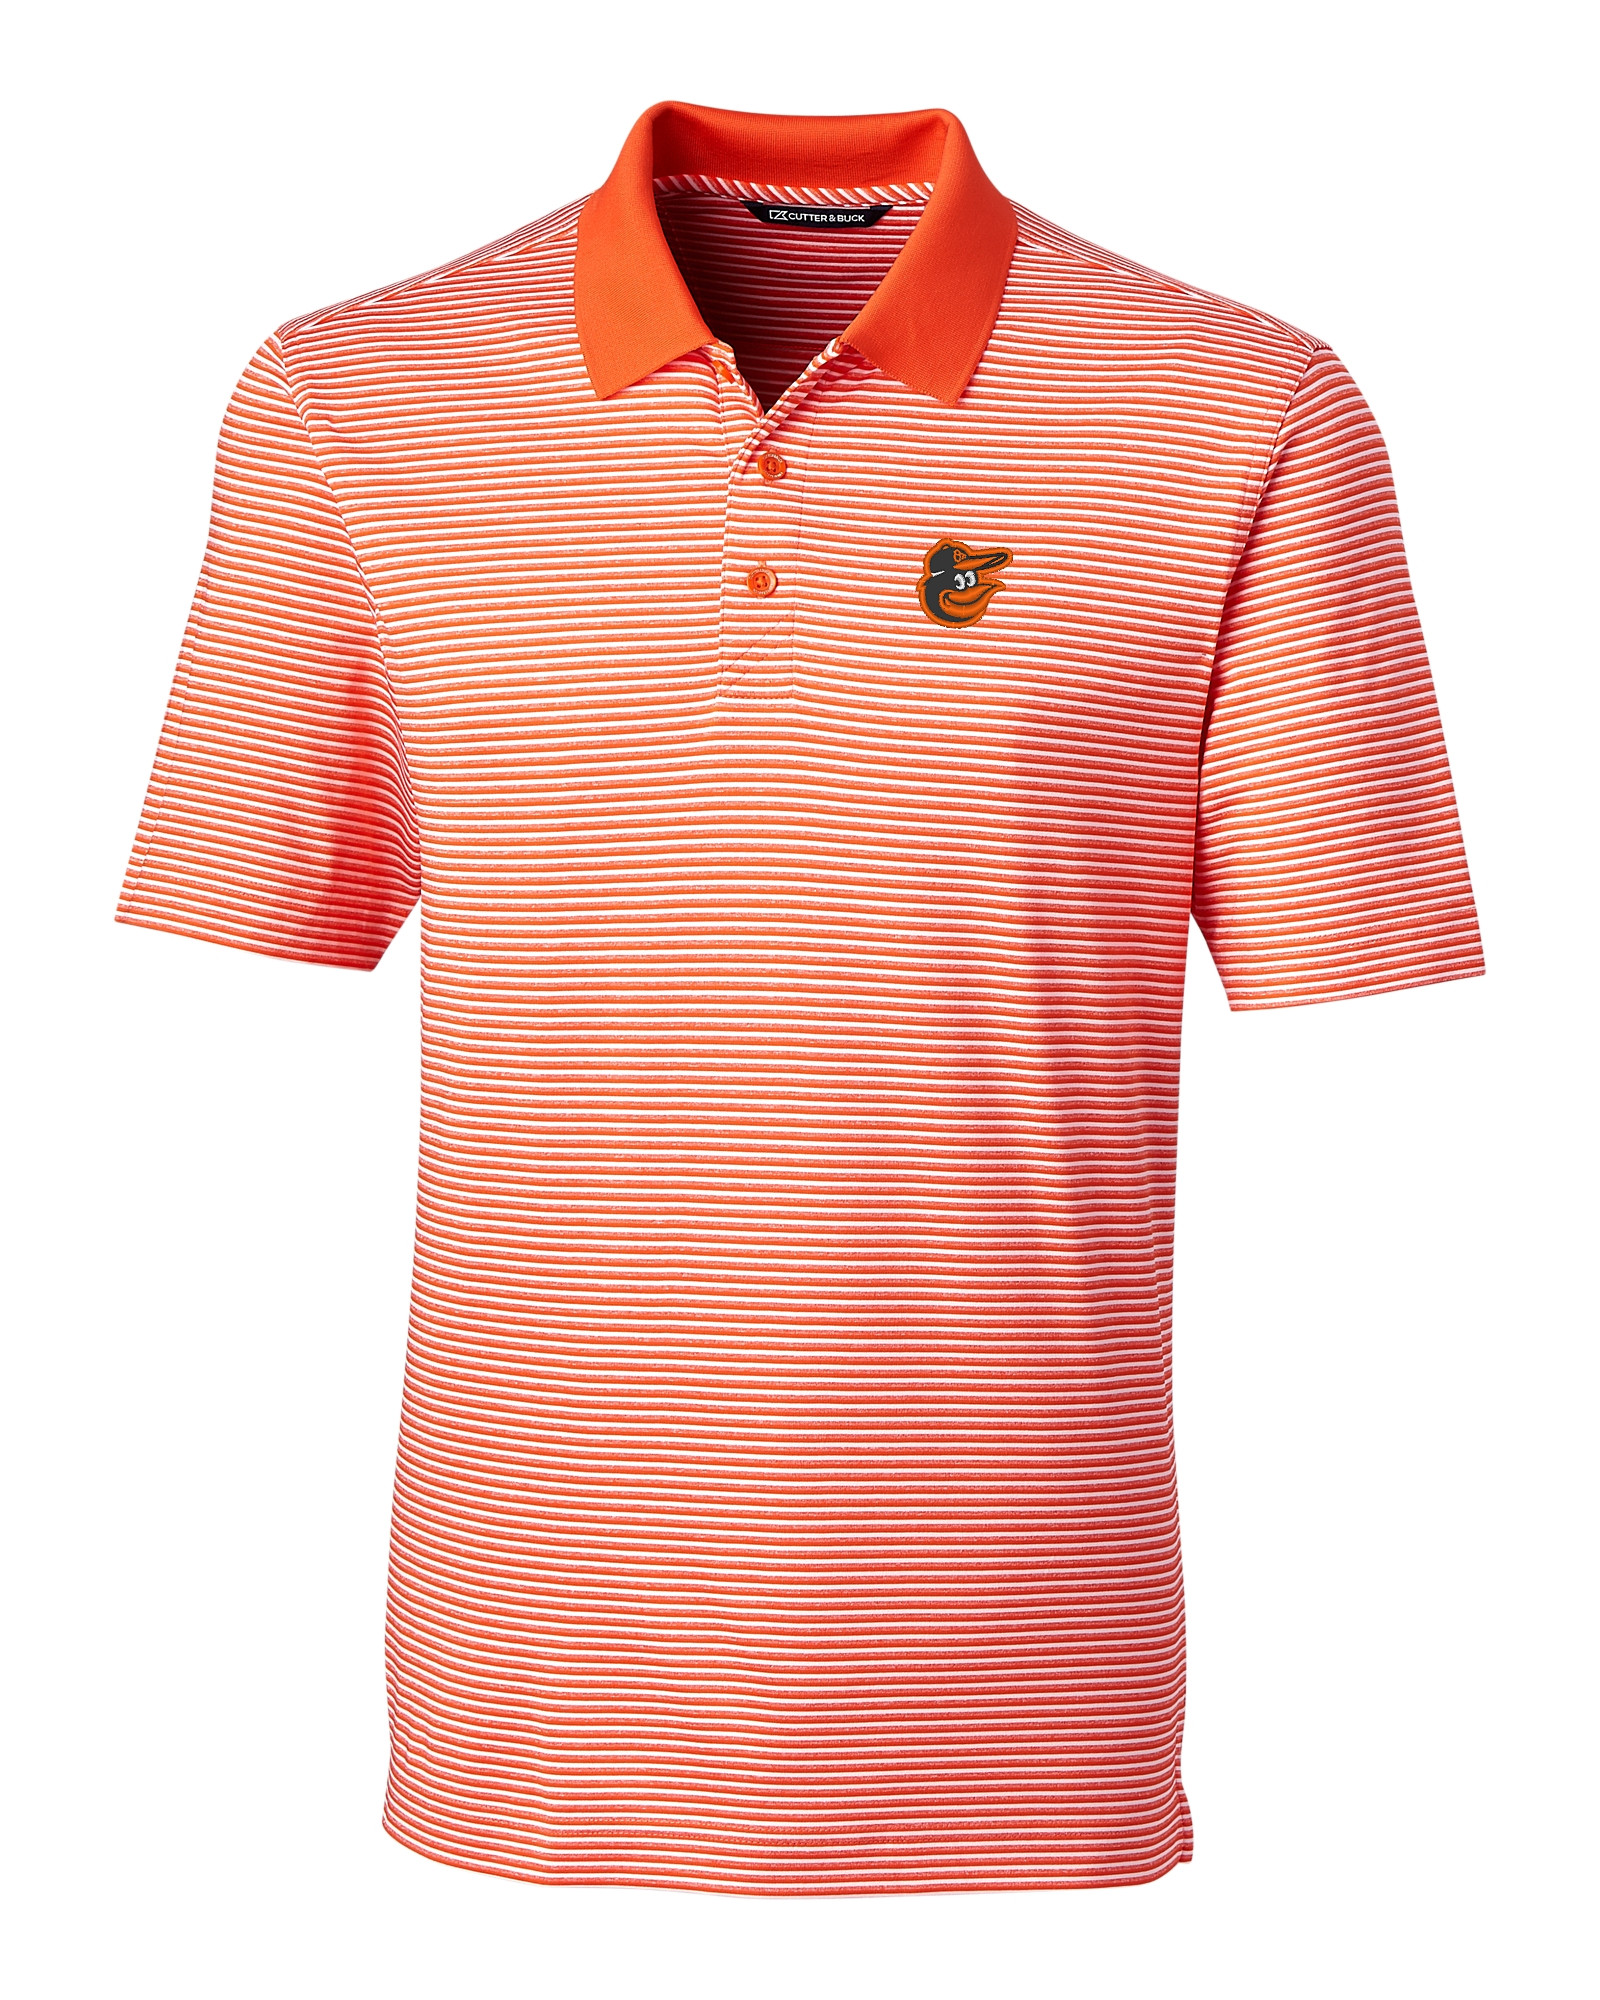 Baltimore Orioles Cutter & Buck Forge Tonal Stripe Stretch Mens Big and Tall Polo